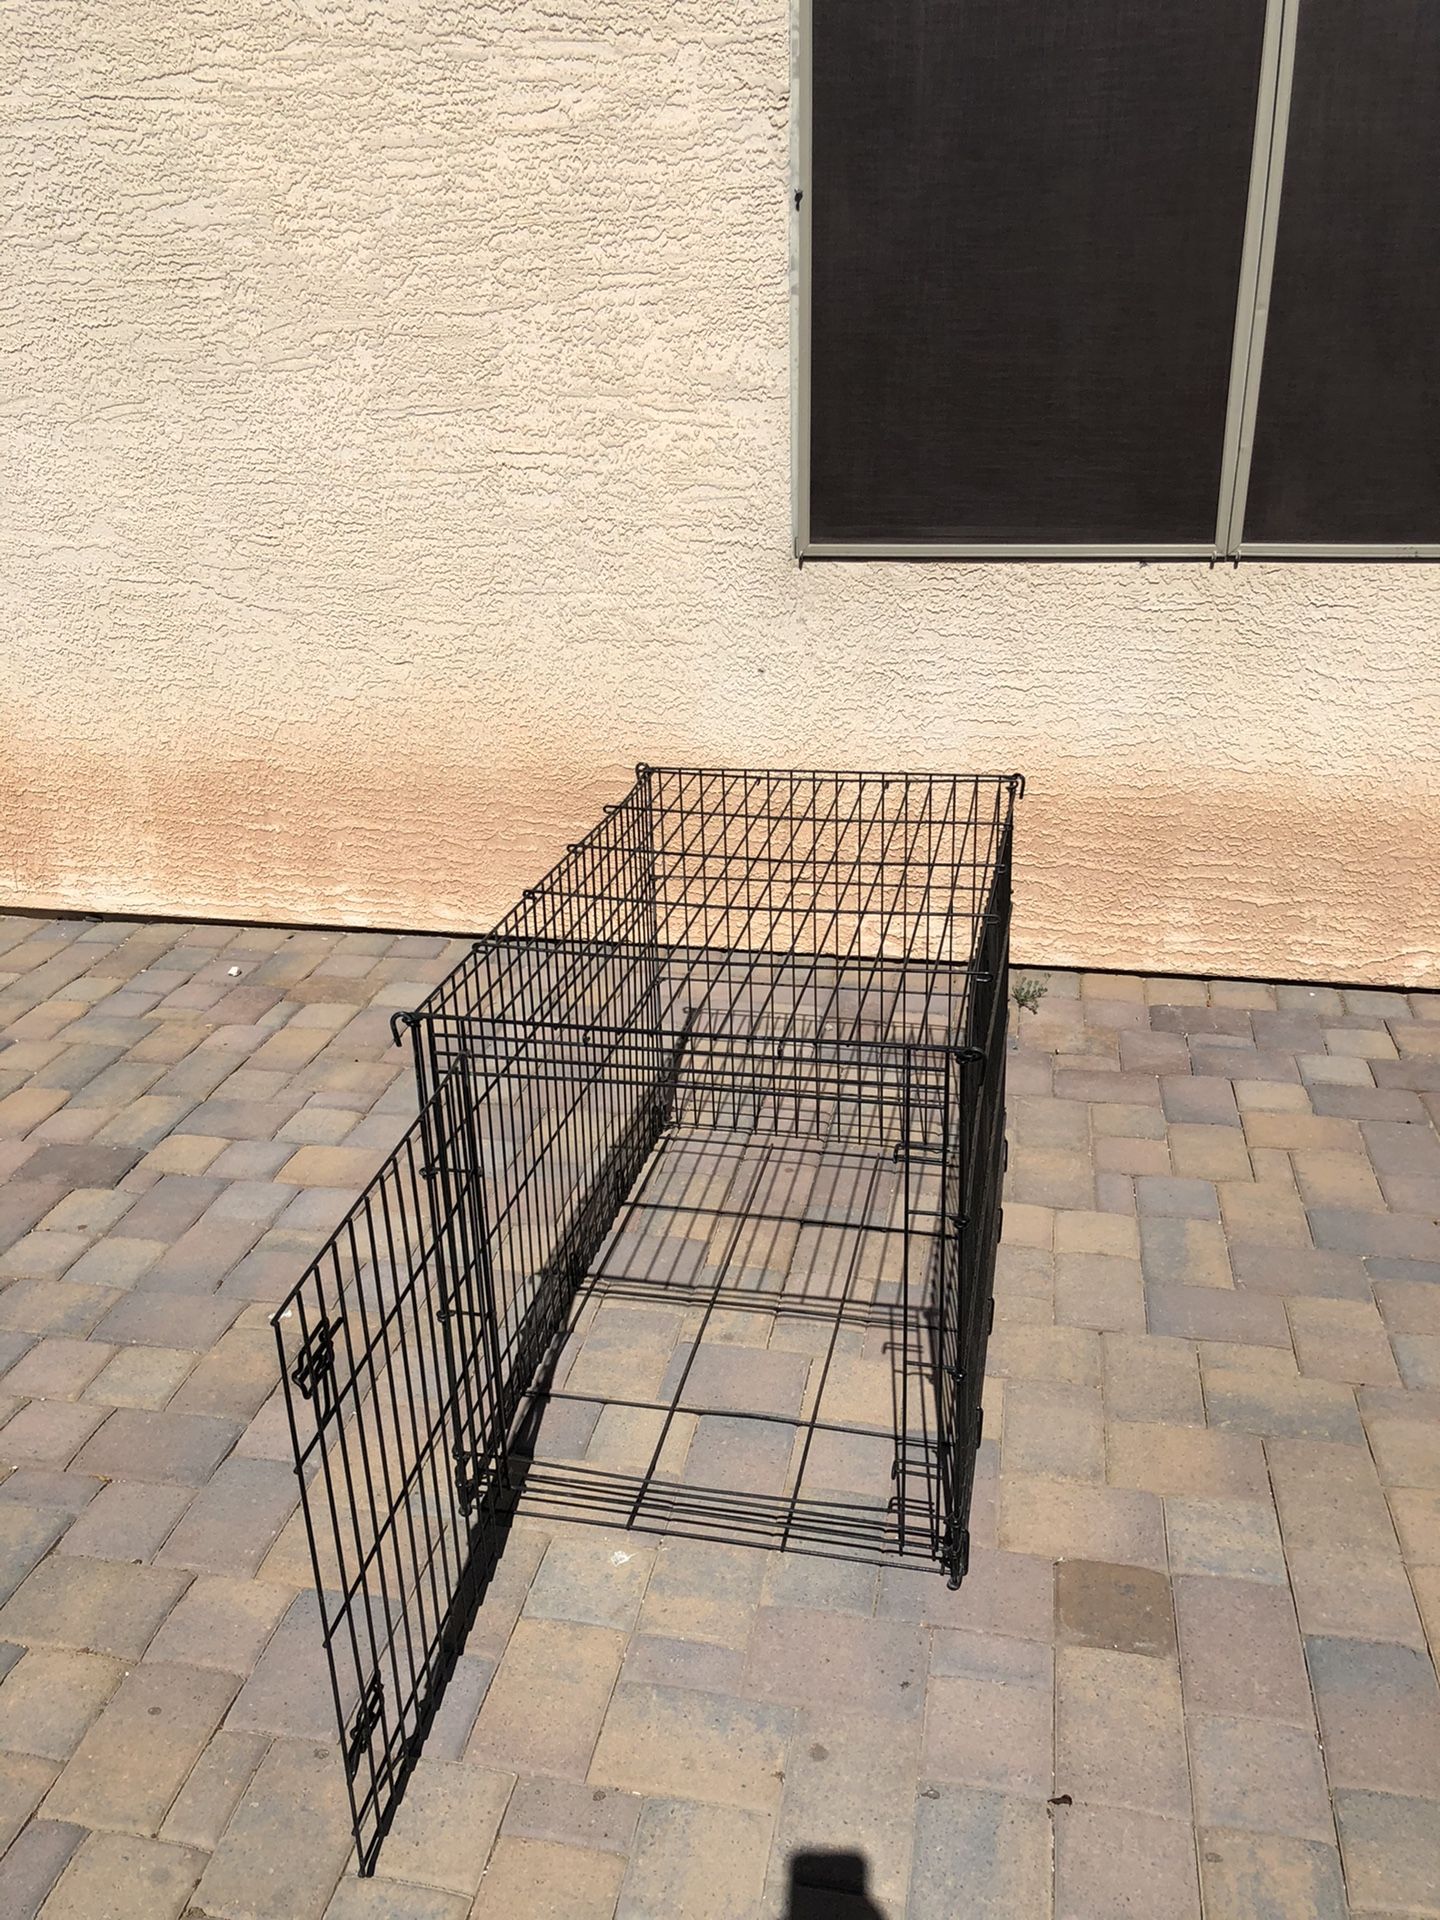 XL Dog crate $40 (25”wide X 42”long